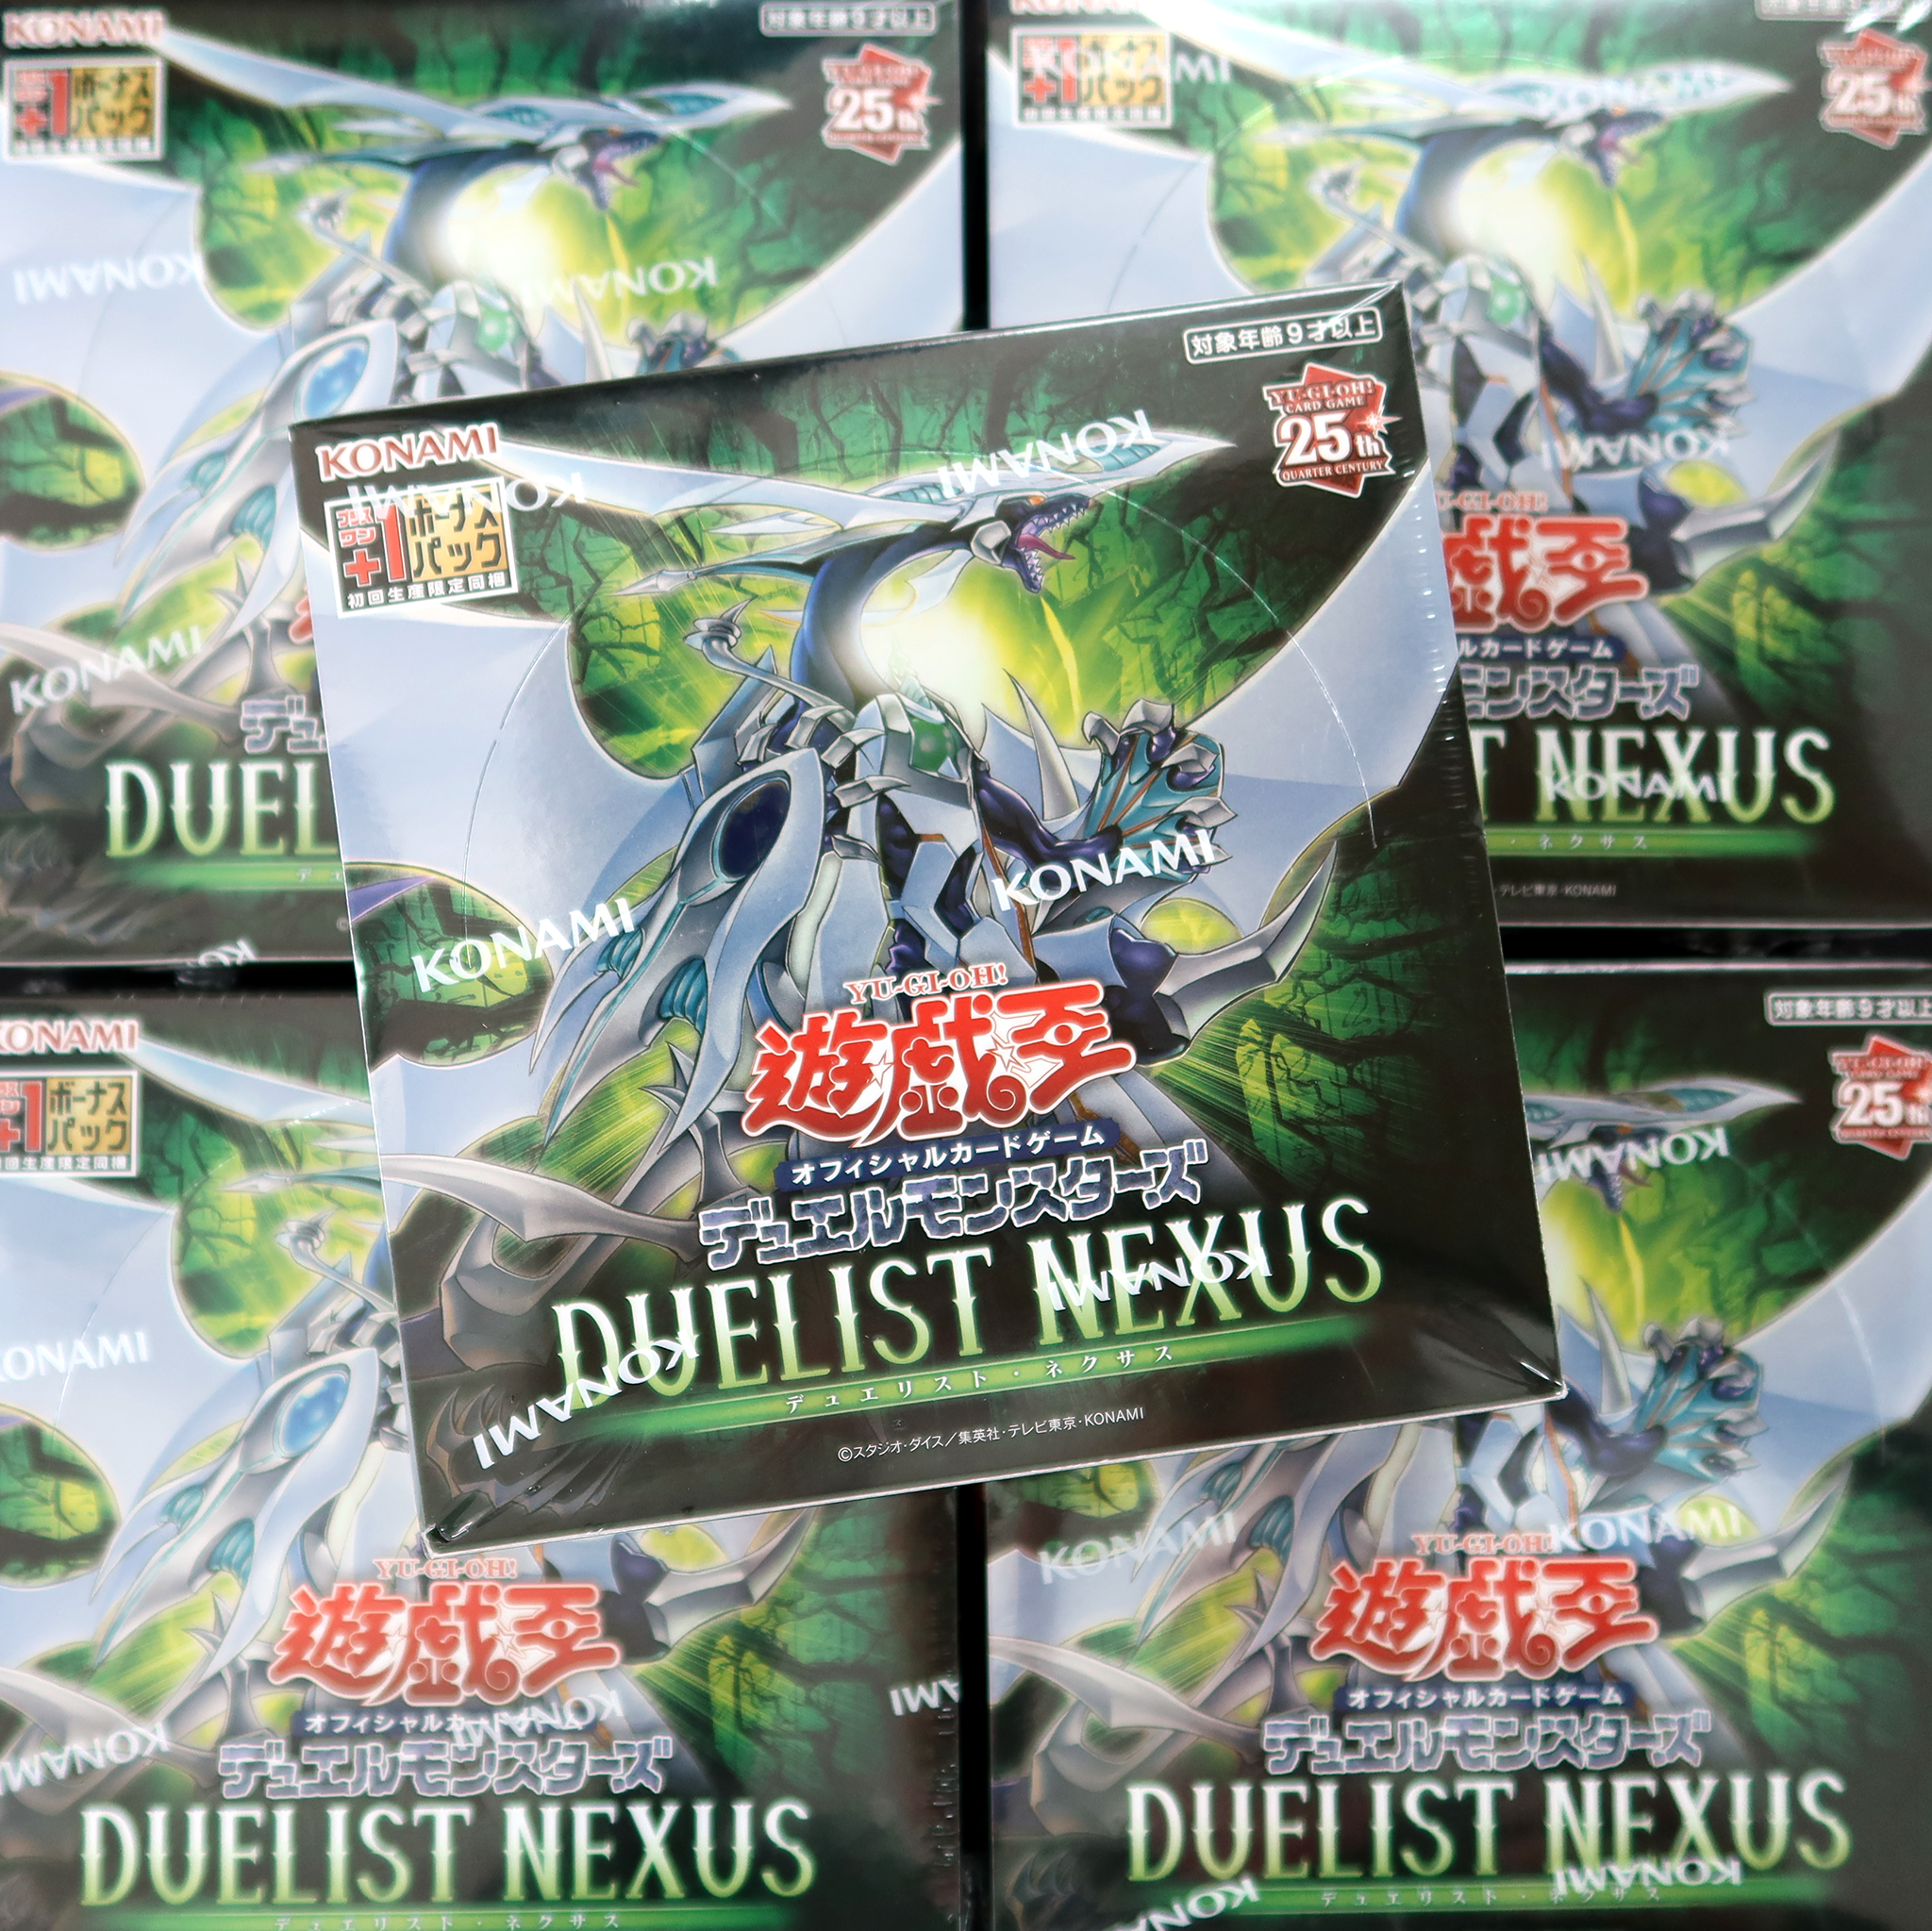 YU-GI-OH! Official Card Game Duel Monsters ｢DUELIST NEXUS｣ Box